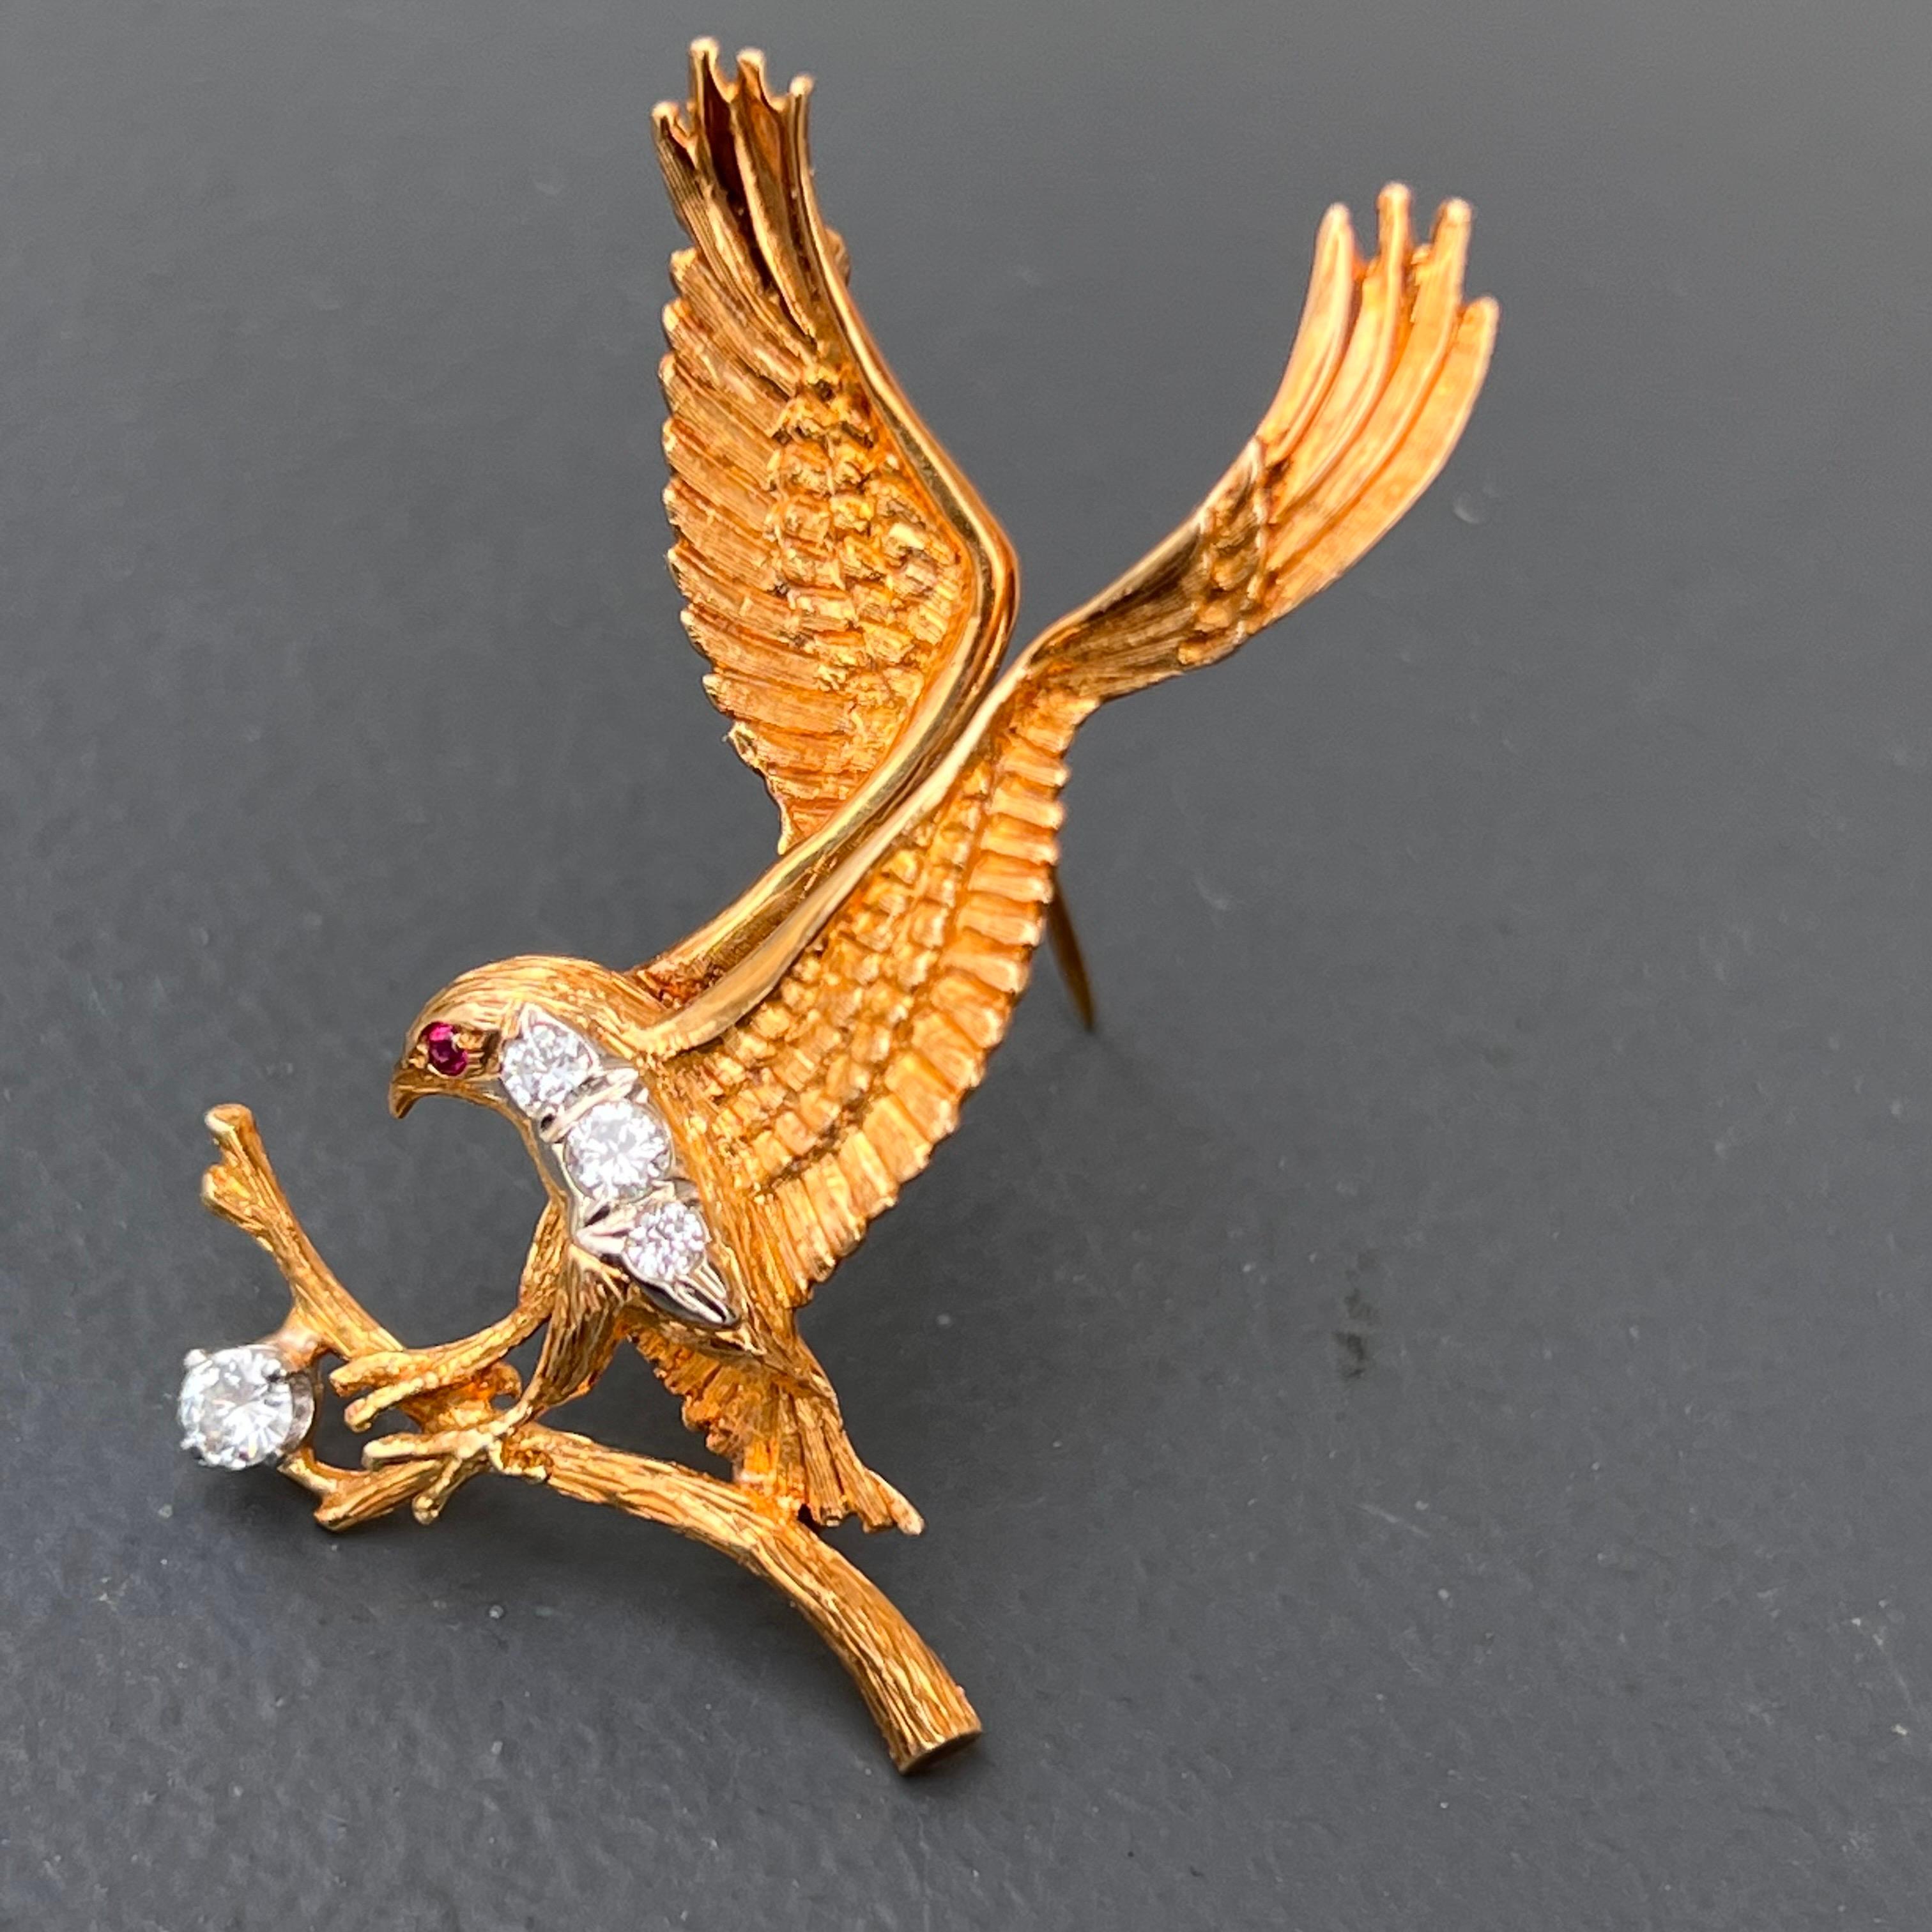 Stunning details on this vintage 18kt solid gold , diamond flying American bald eagle pin with ruby eye . Rollover clasp on backside .
Marked 18kt with faded initials . This pin reminds me of Herbert Rosenthal work .

Materials :
18kt solid